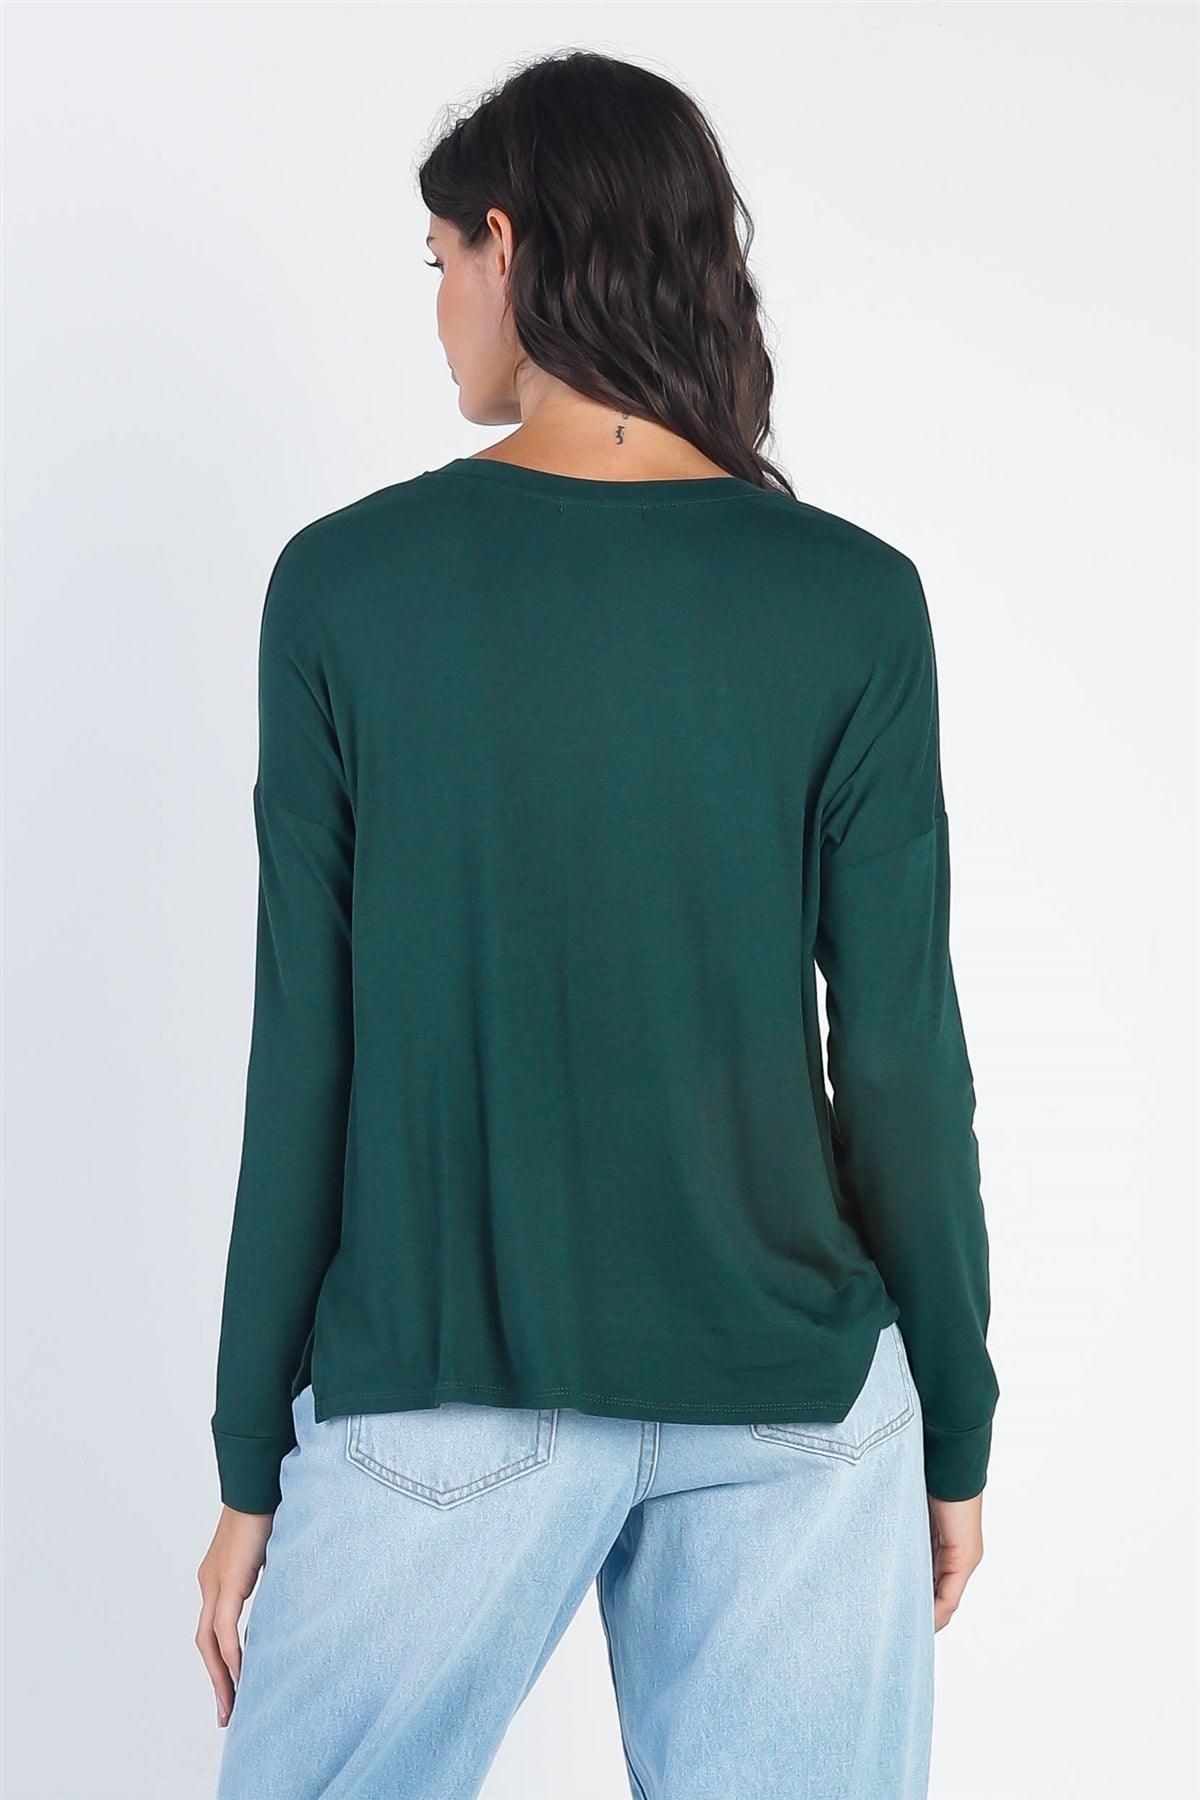 Heather Green V-Neck Cuff Long Sleeve Top /1-1-1